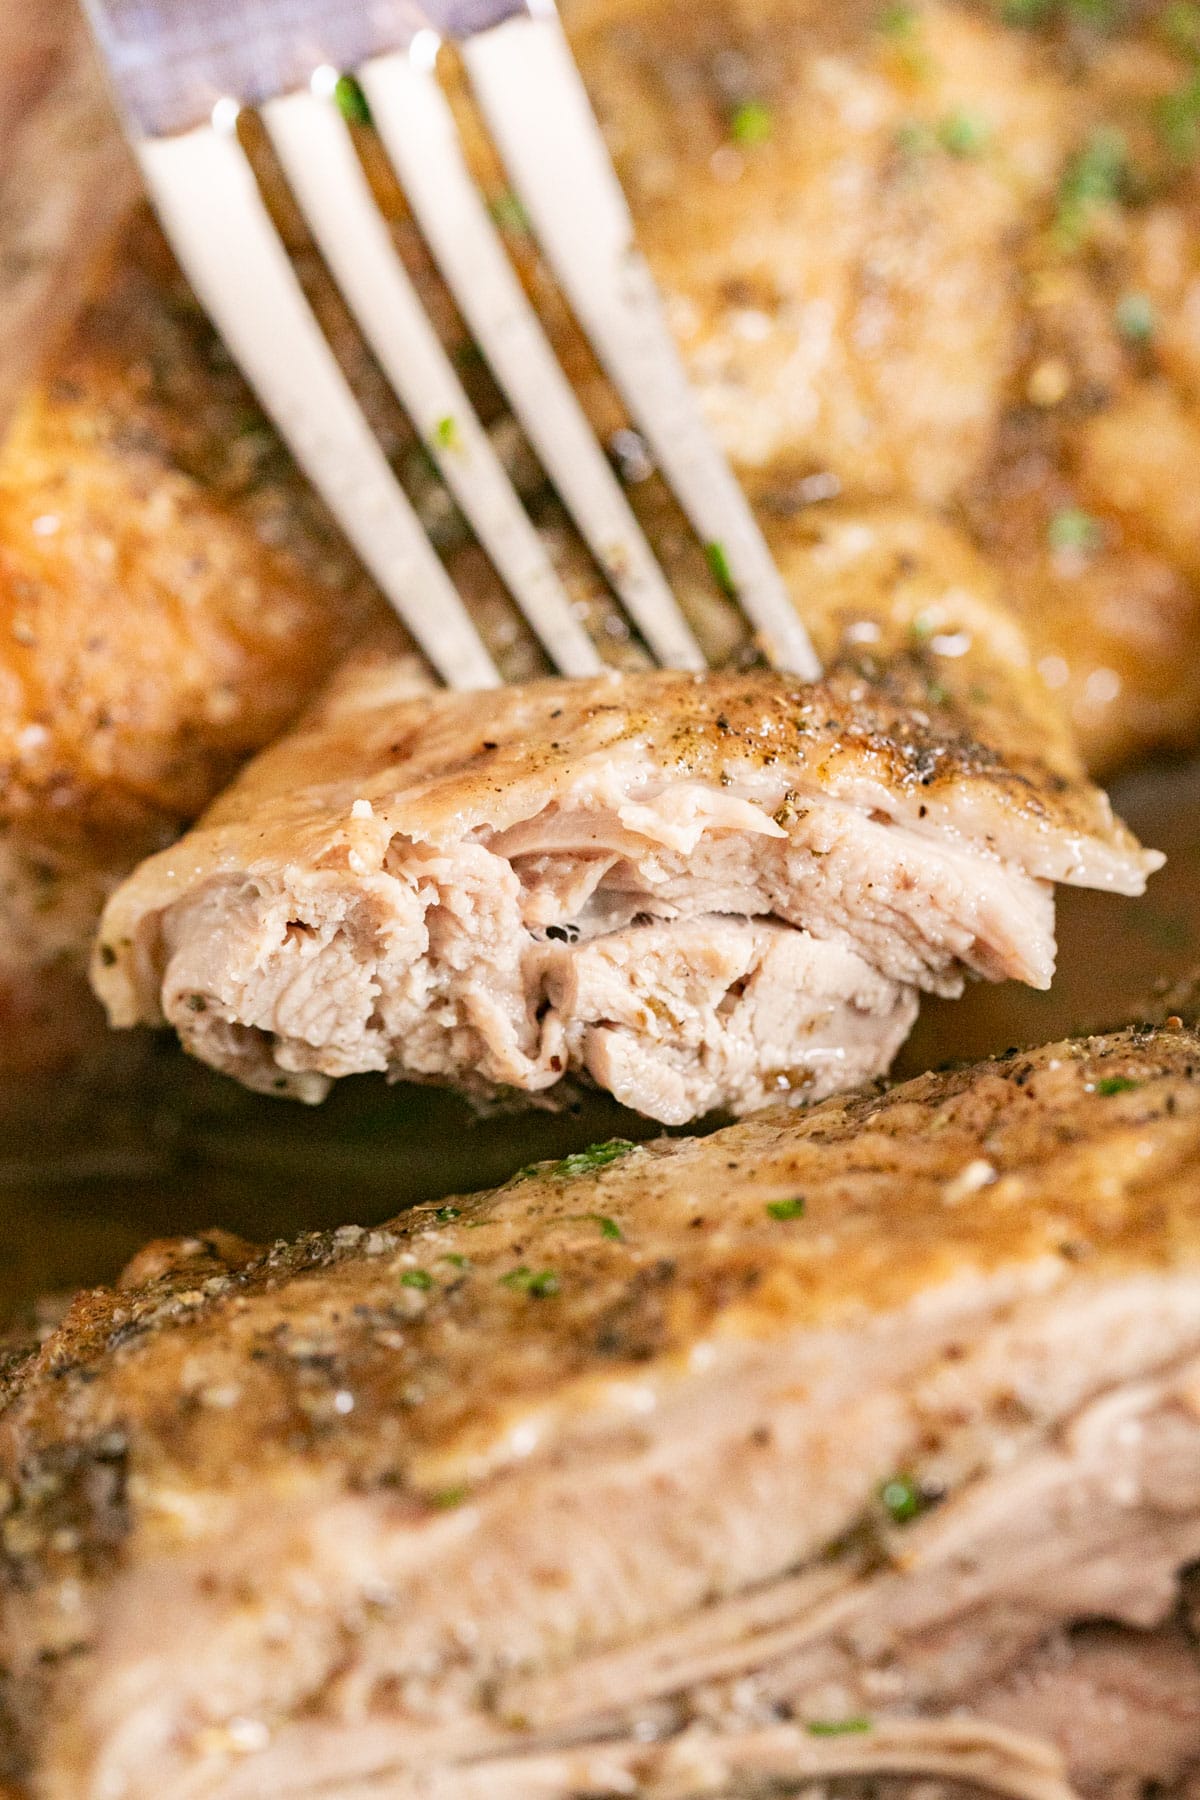 A close up image of a fork holding a bite of roast turkey thigh exposing the juicy inside of the meat.